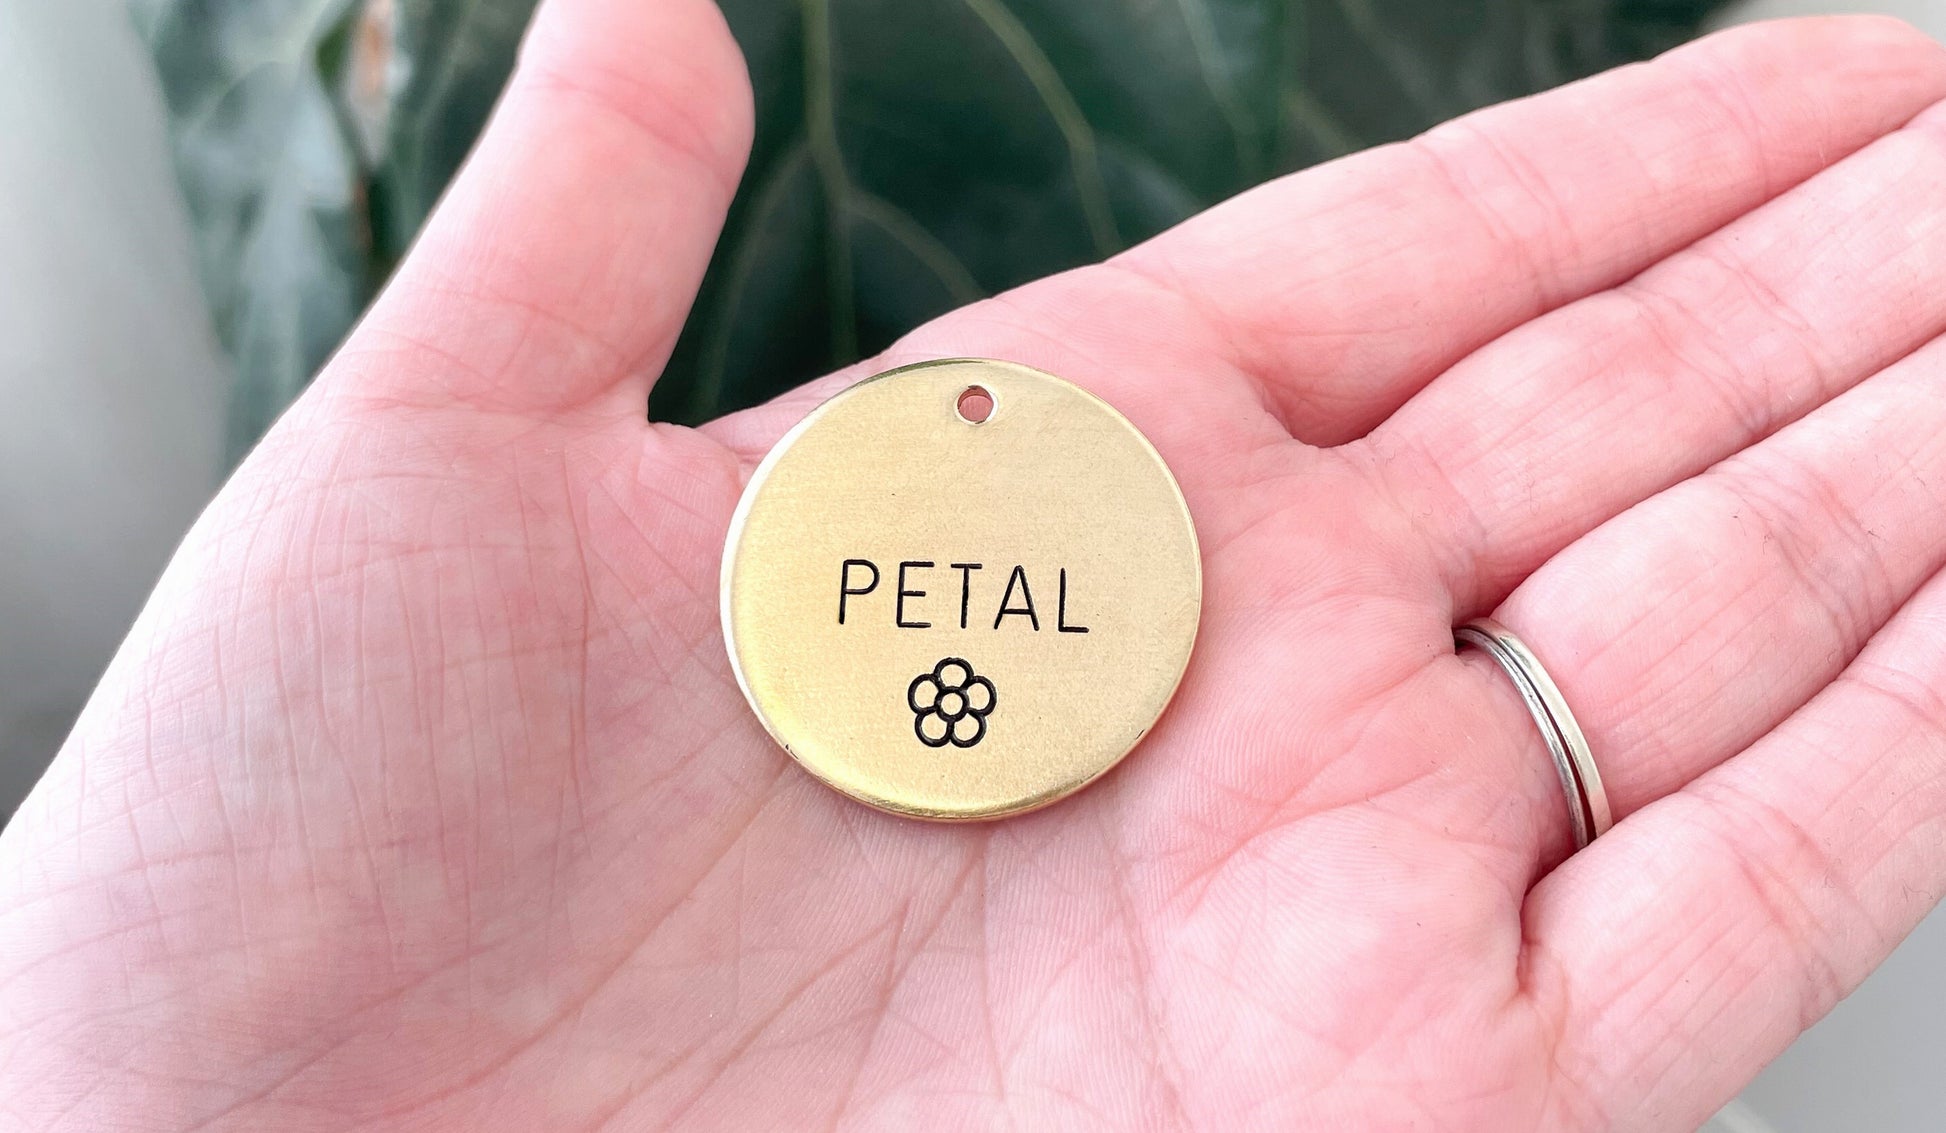 Personalized Dog Tag - Flower Petals Design Engraved Dog Tag - Flower Design Tag - Cat ID Tag - Dog Collar Tag - Custom Dog Tag - Personalized Tag - Pet ID Tag - Pet Name Tag